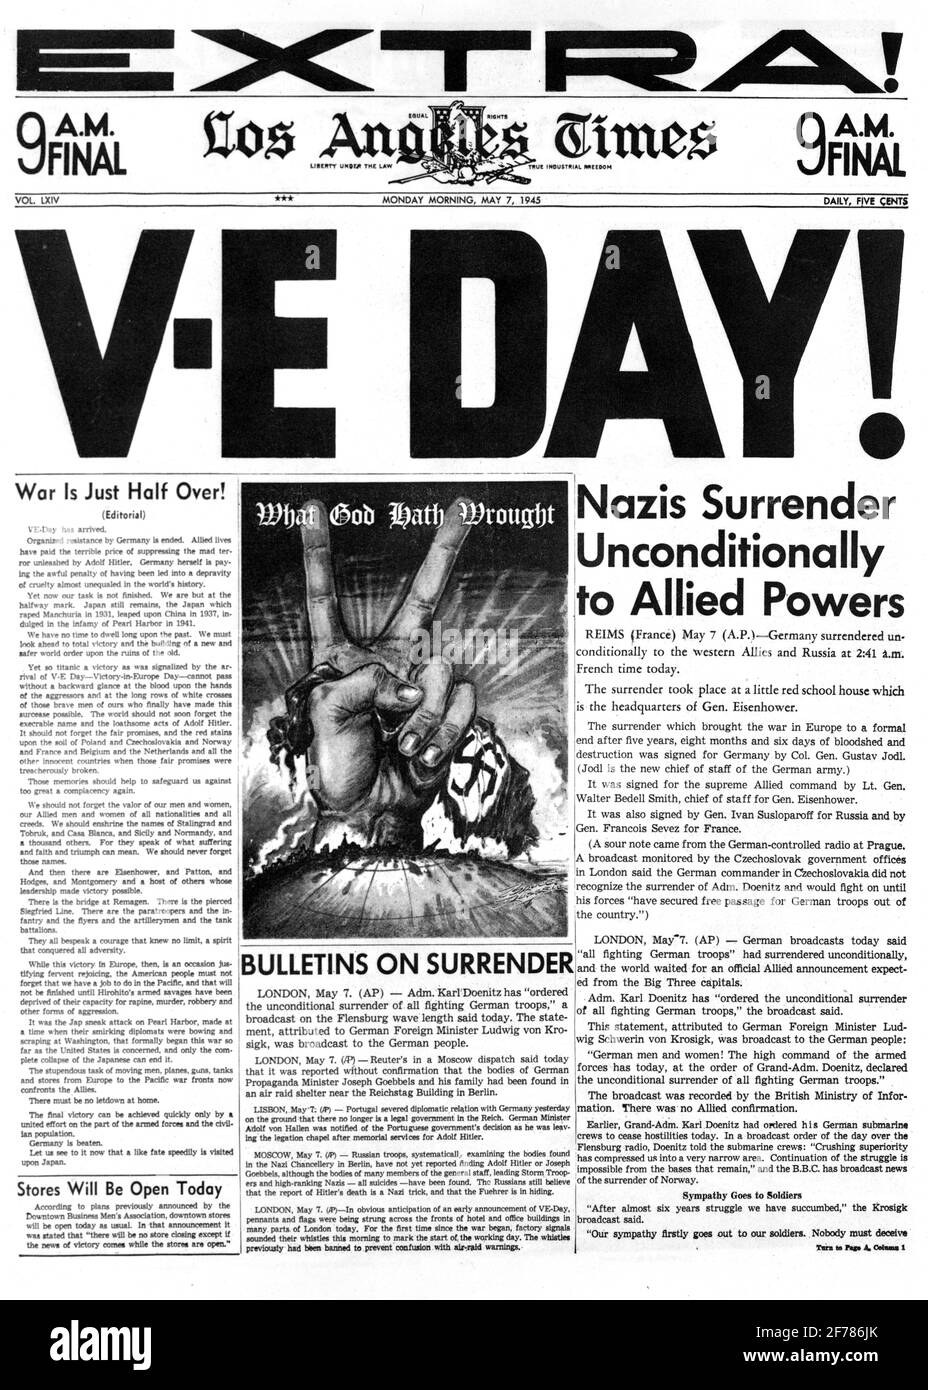 1940s THE LOS ANGELES TIMES NEWSPAPER MAY 7 1945 HEADLINE V-E DAY NAZIS SURRENDER UNCONDITIONALLY TO ALLIED POWERS CA USA - asp h1093 ASP001 HARS NAZI WORLD WAR 2 1945 MAY 7 NAZIS POWERS SURRENDER V-E ALLIED ALLIES BLACK AND WHITE OLD FASHIONED Stock Photo